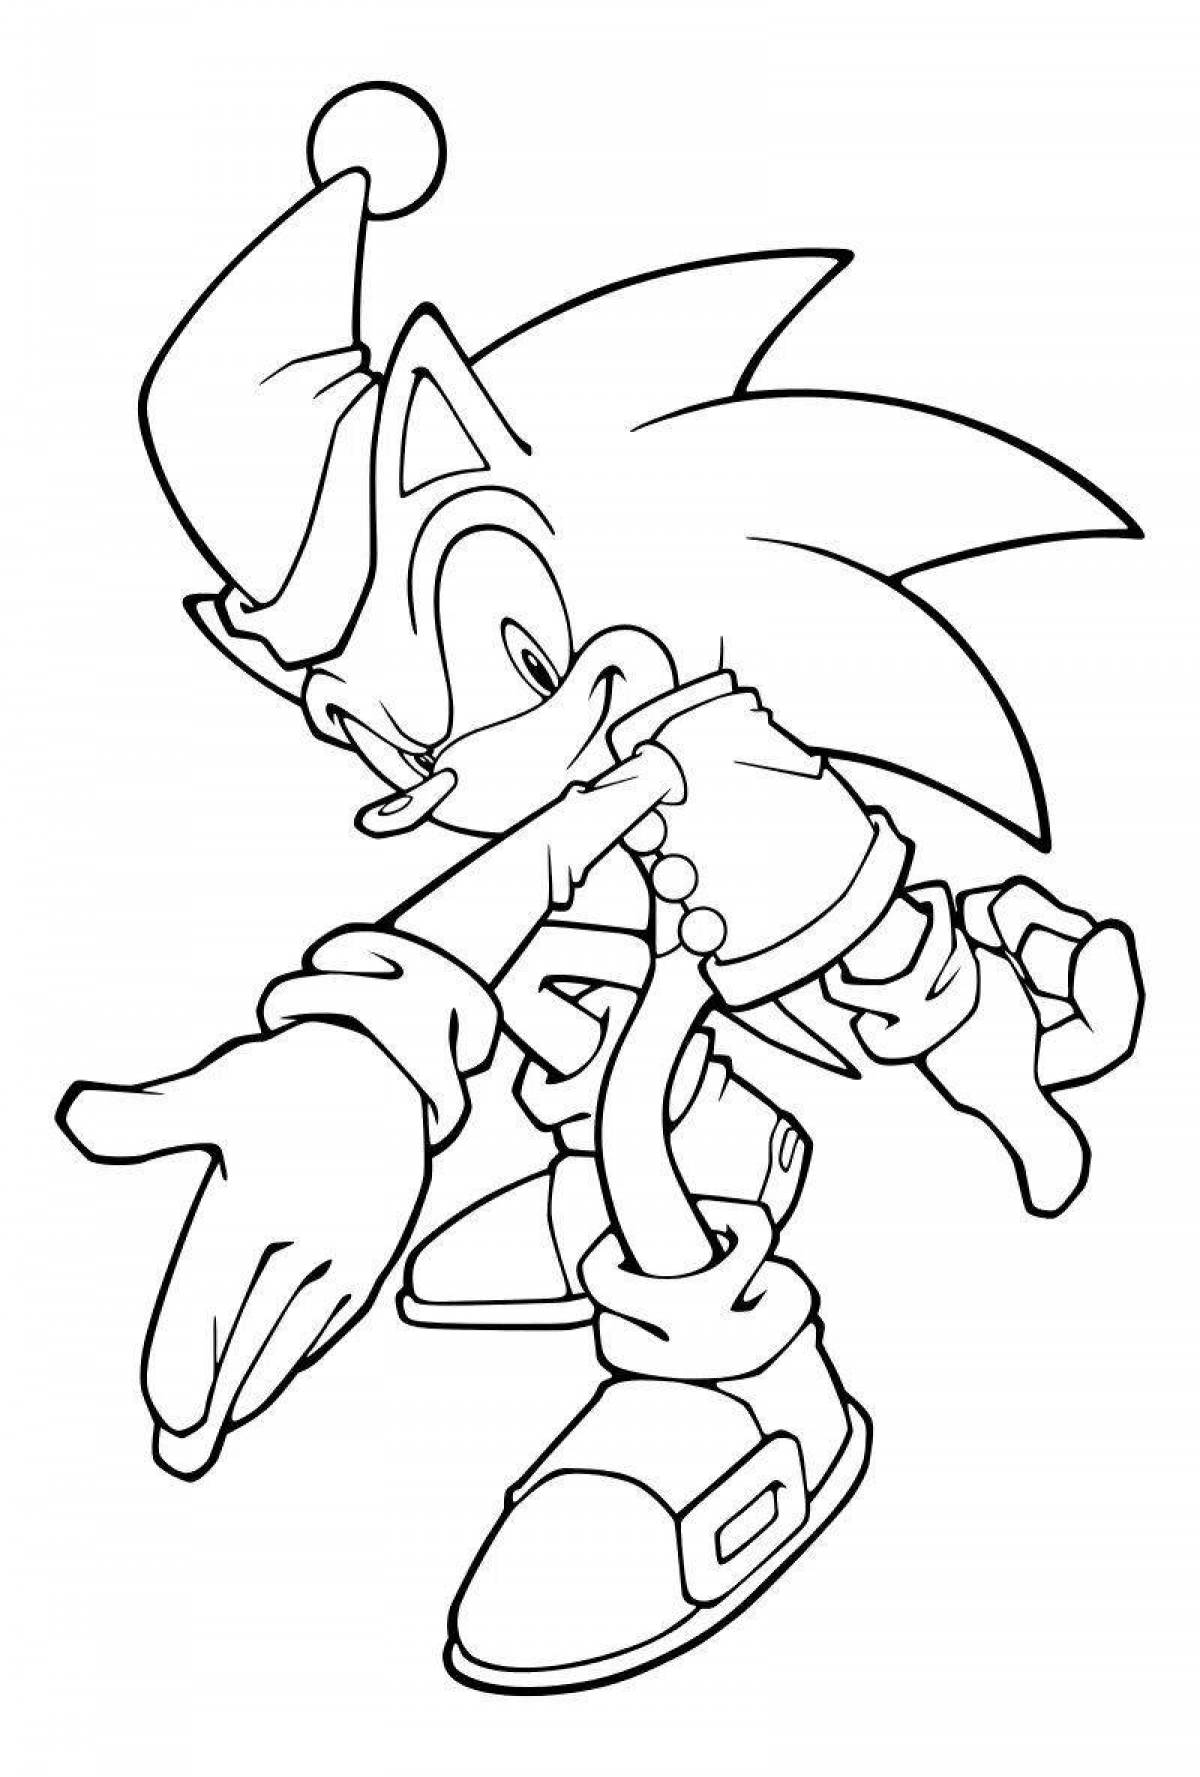 Majestic infinity sonic coloring page